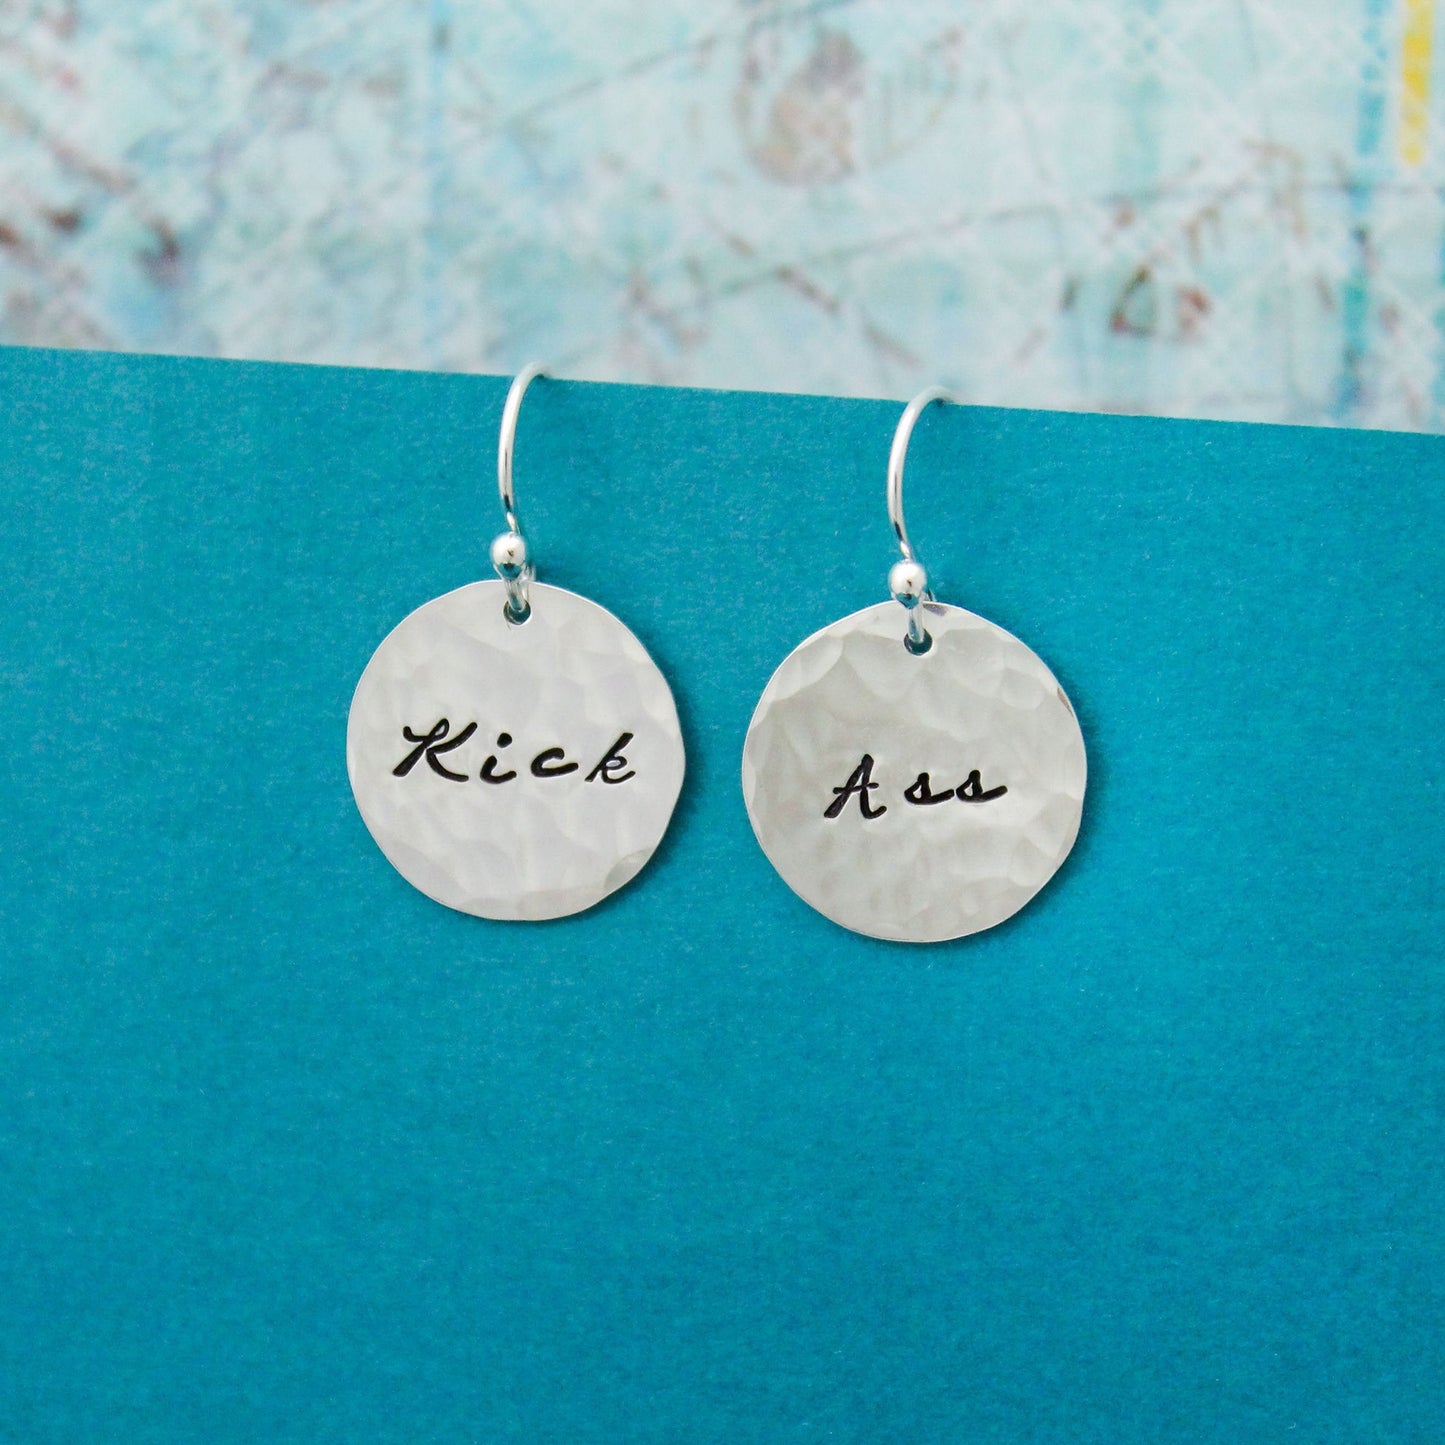 Kick Ass Earrings in Sterling Silver, Motivational Inspirational Jewelry, Gift for Her, Curse Word Jewelry, Kick Ass Gift, Punk Rock Jewelry